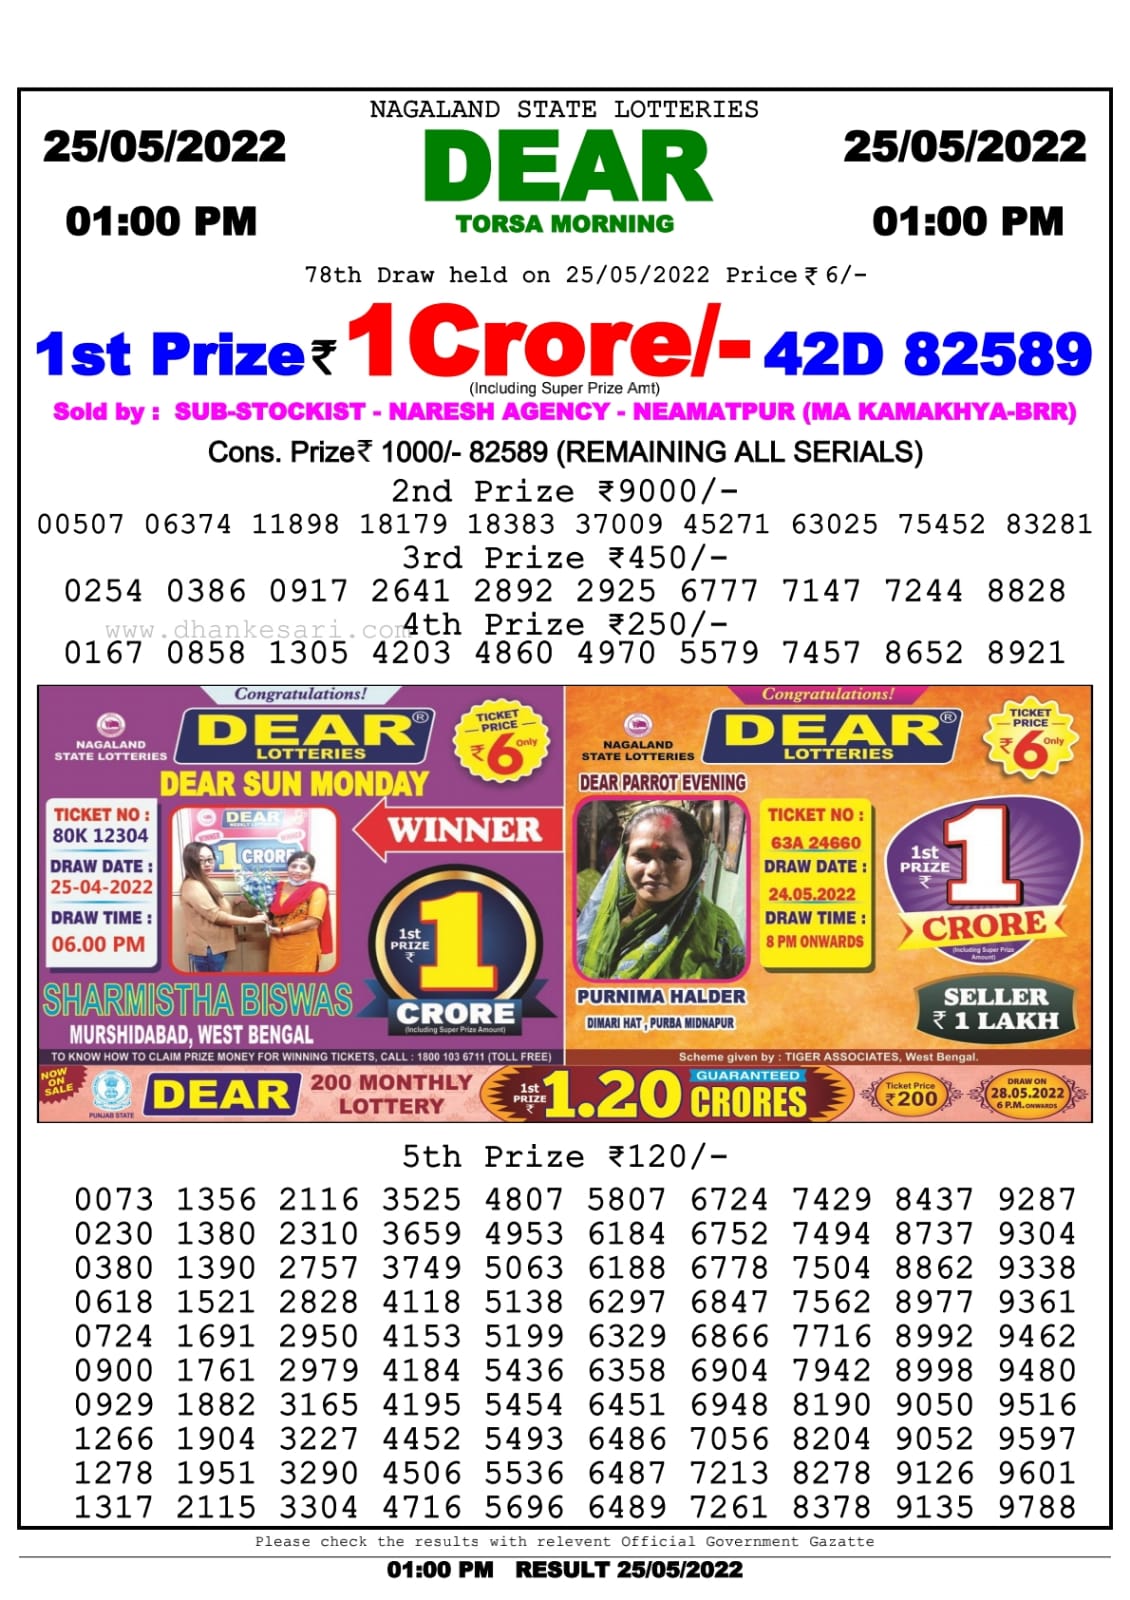 Dear Lottery Nagaland state Lottery Results 01.00 pm 25.05.2022